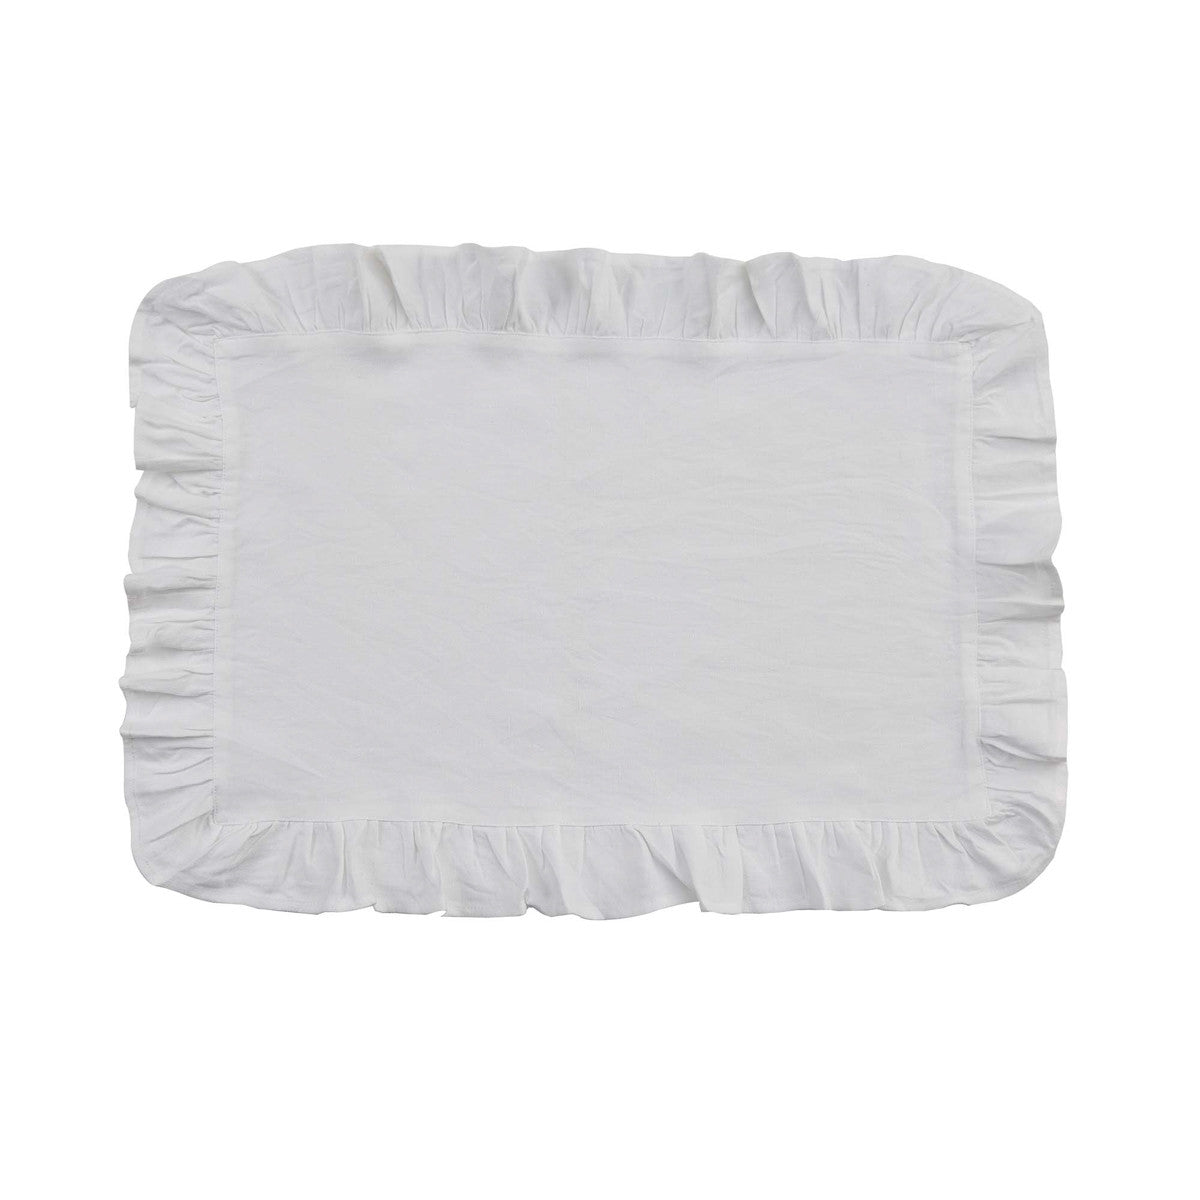 Ruffle Placemat - White Set Of 6 Park Designs